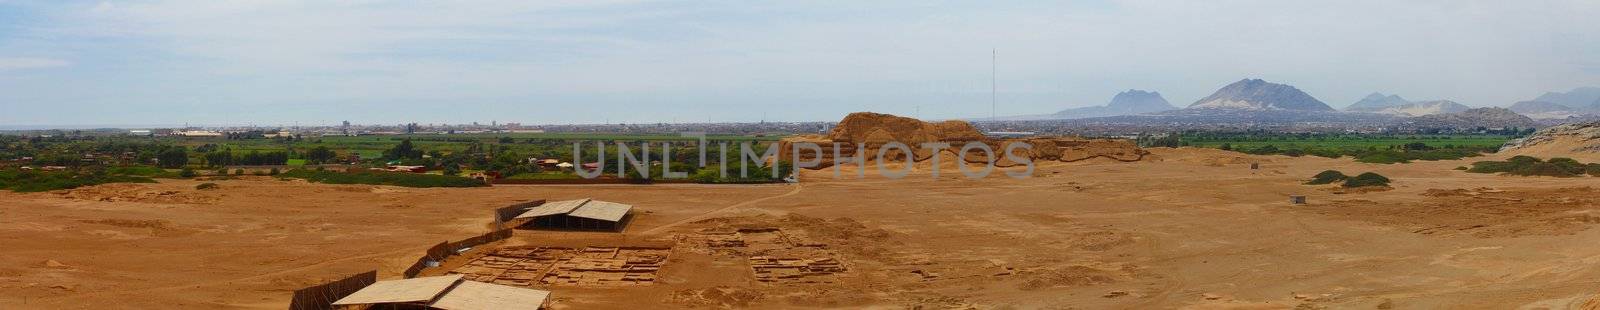 Panoramic photo of Huaca del Sol and archaeological excavations
 by gigidread